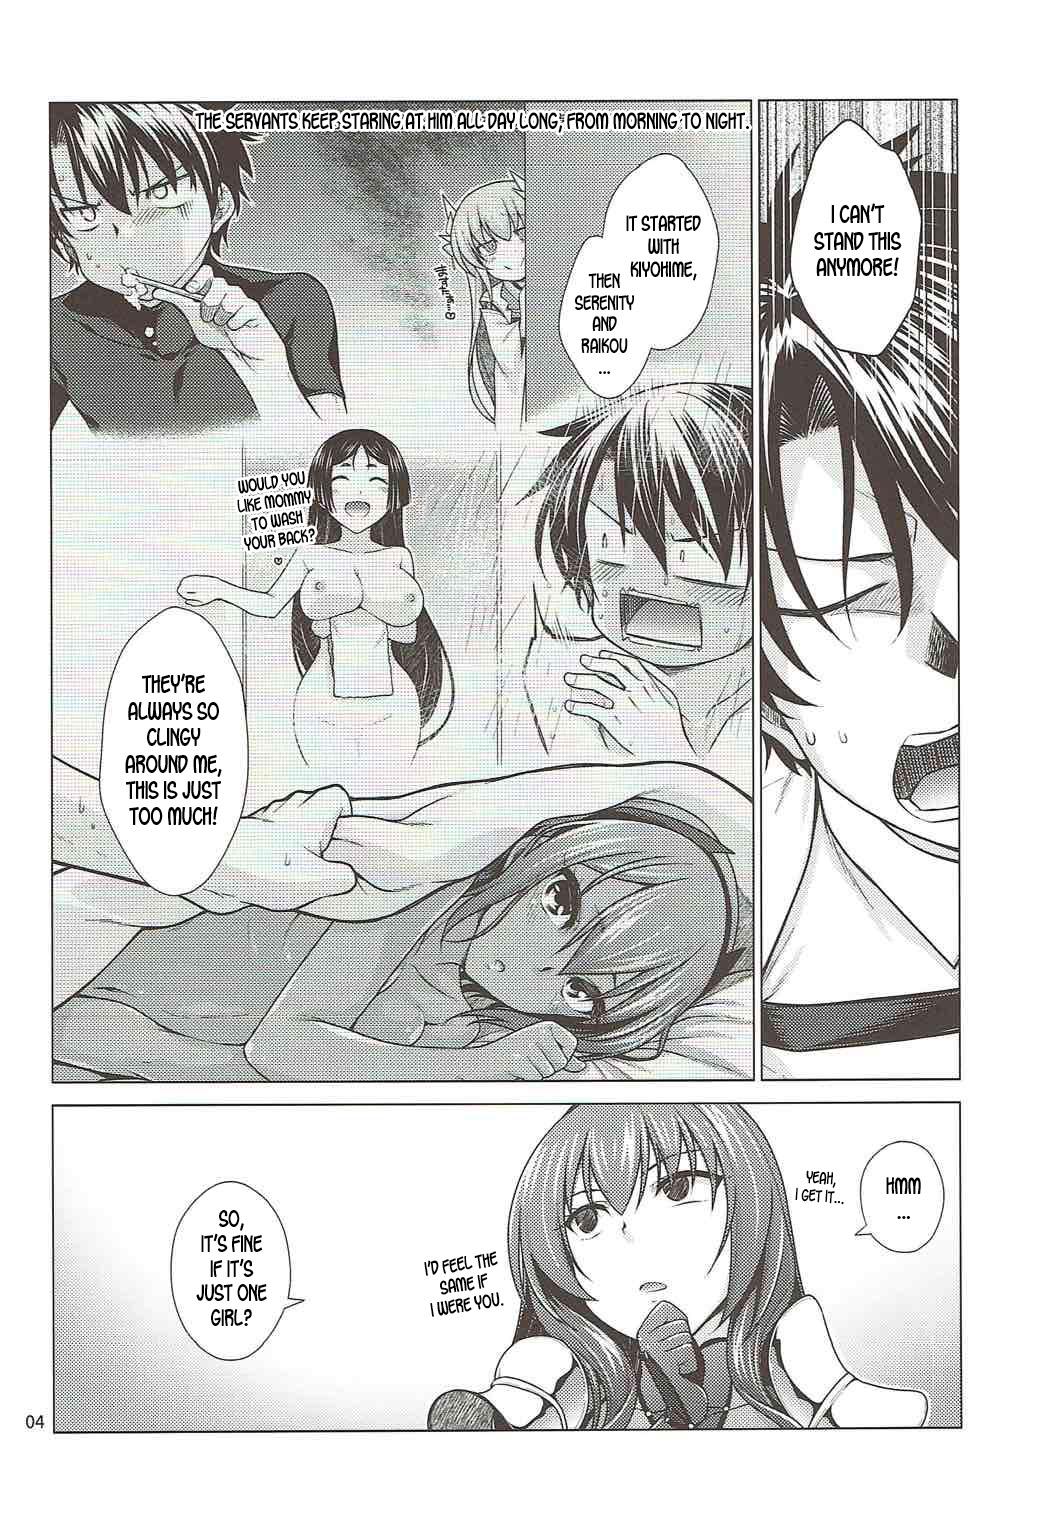 Sesso Scathach Shishou to Celt Shiki Gachihamex! - Fate grand order Chat - Page 3